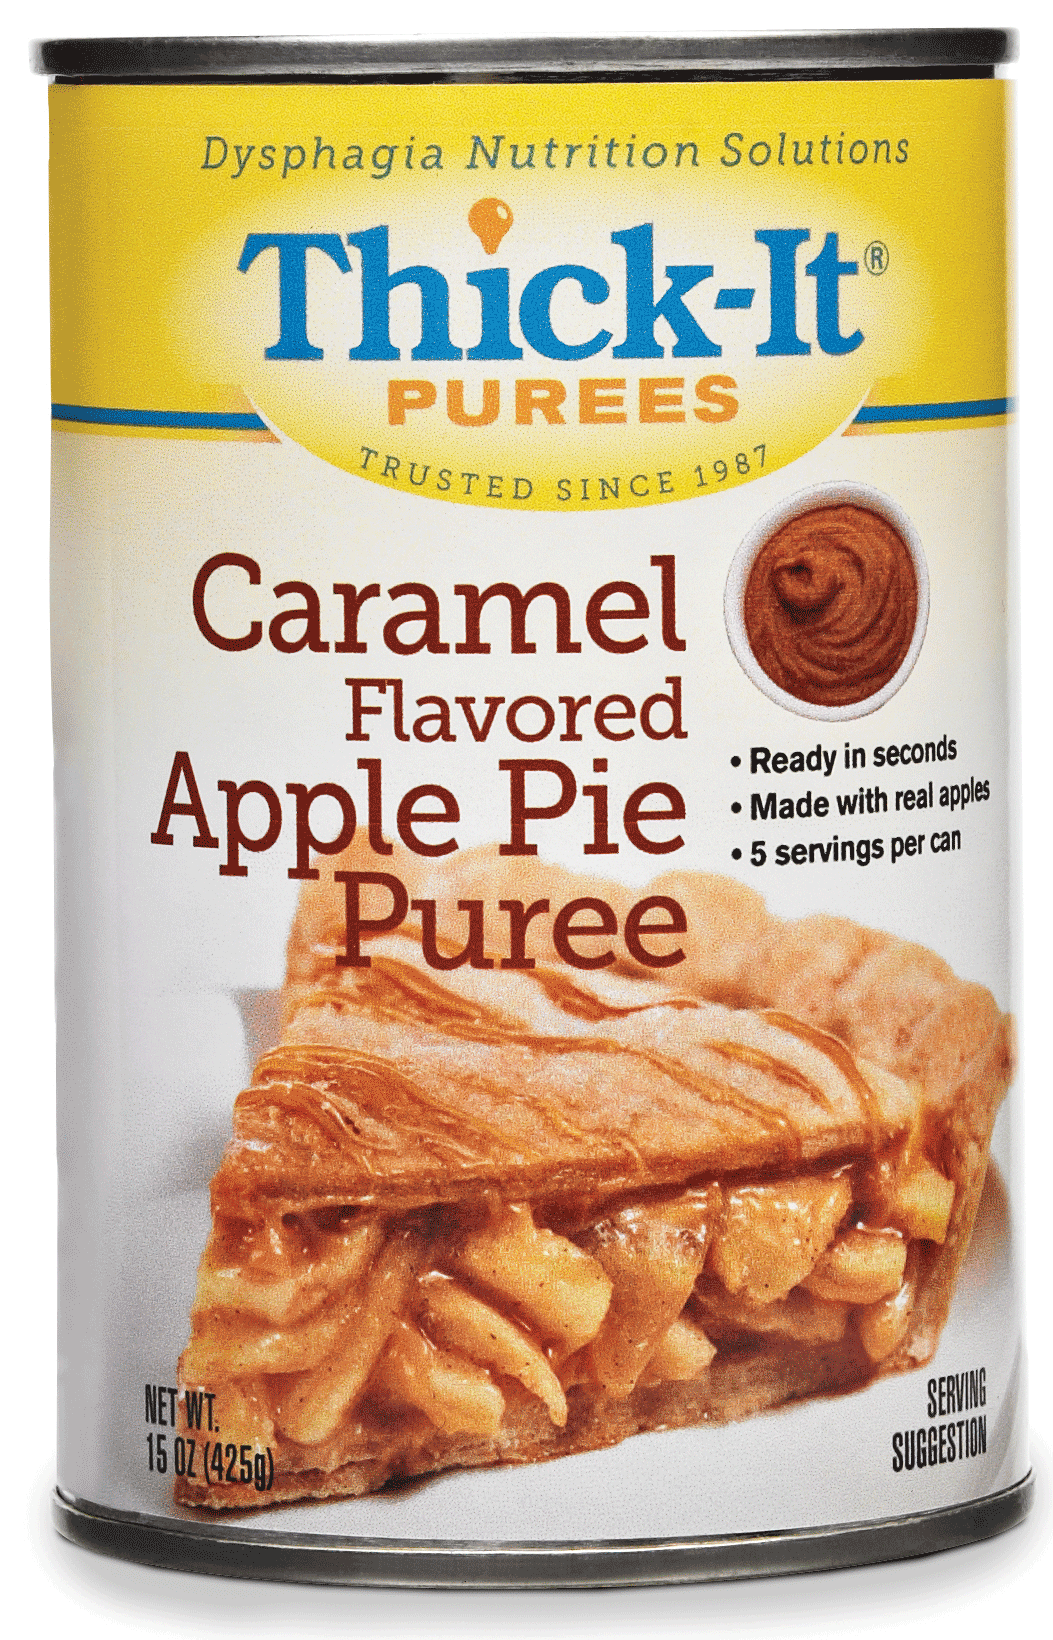 EA/1 - Thick-It Caramel Flavored Apple Pie Puree 15 oz. Can - Best Buy Medical Supplies